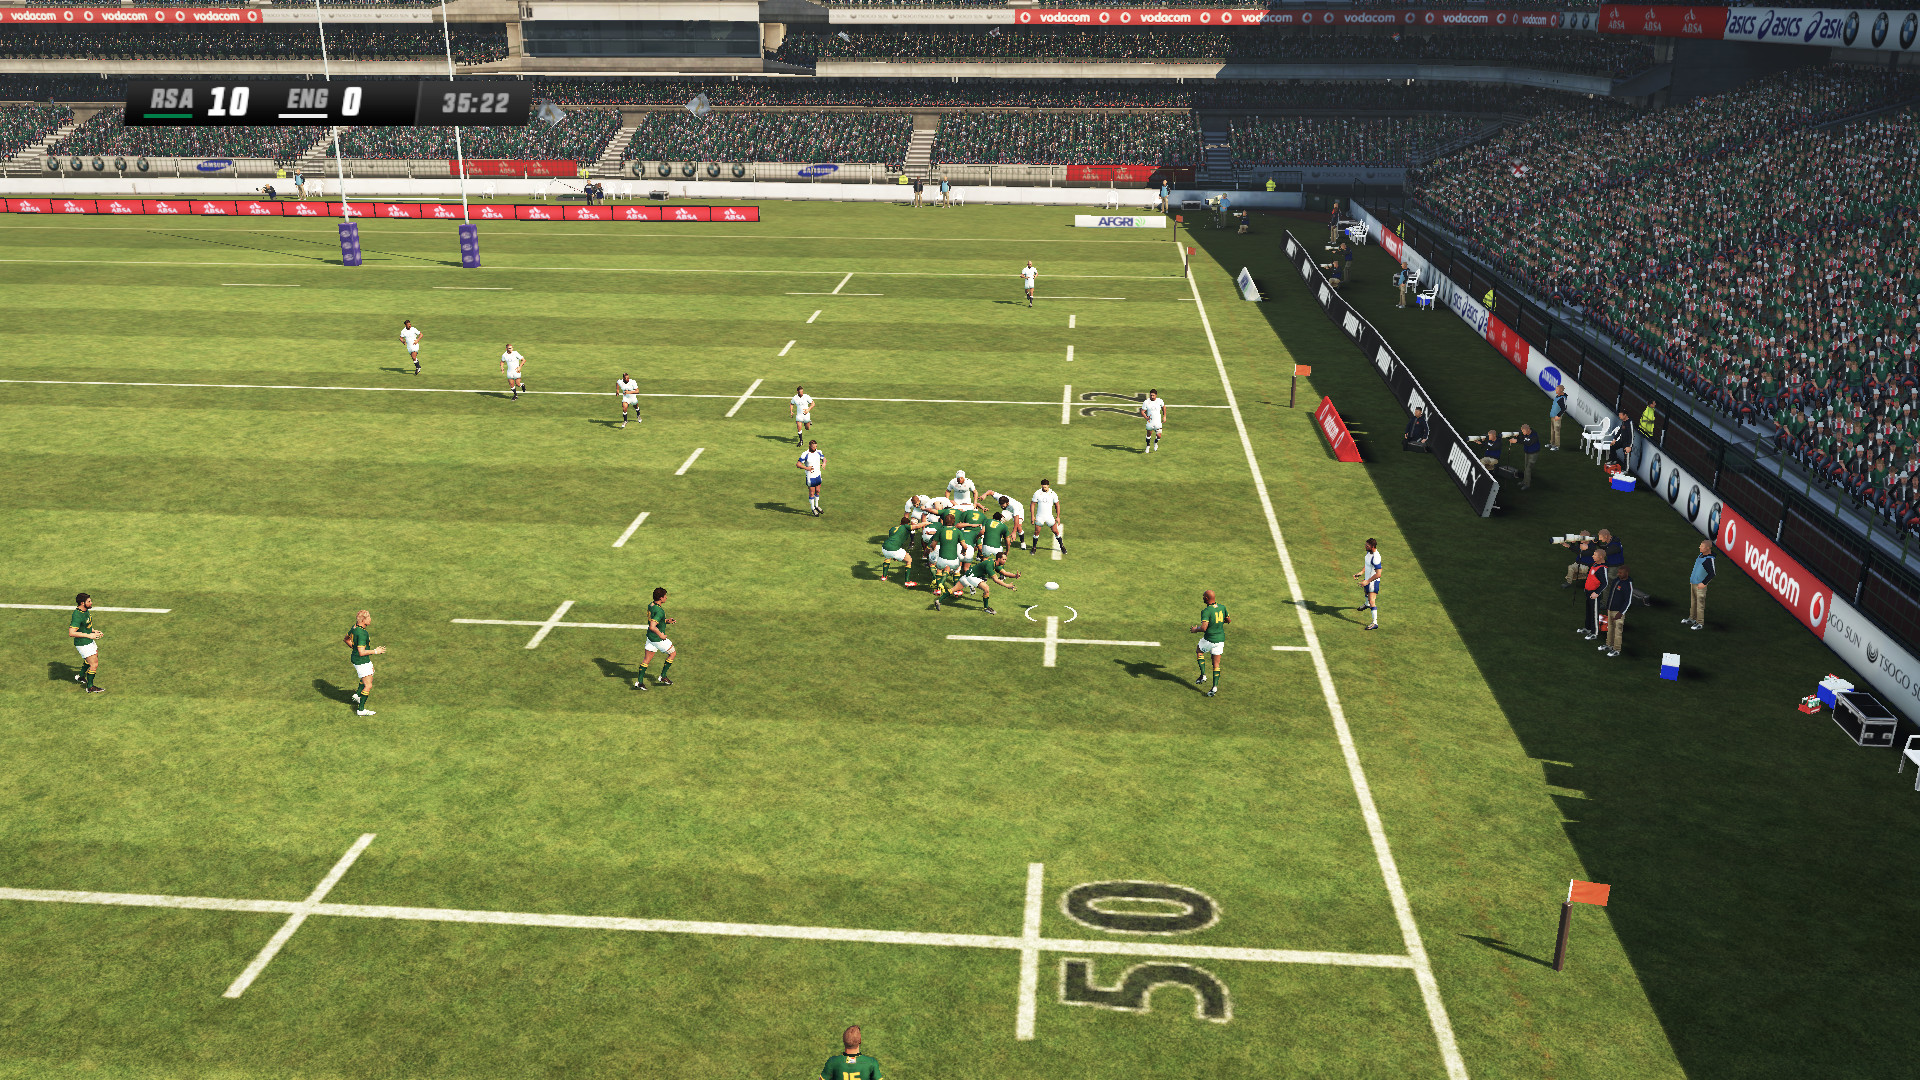 Rugby Challenge 3